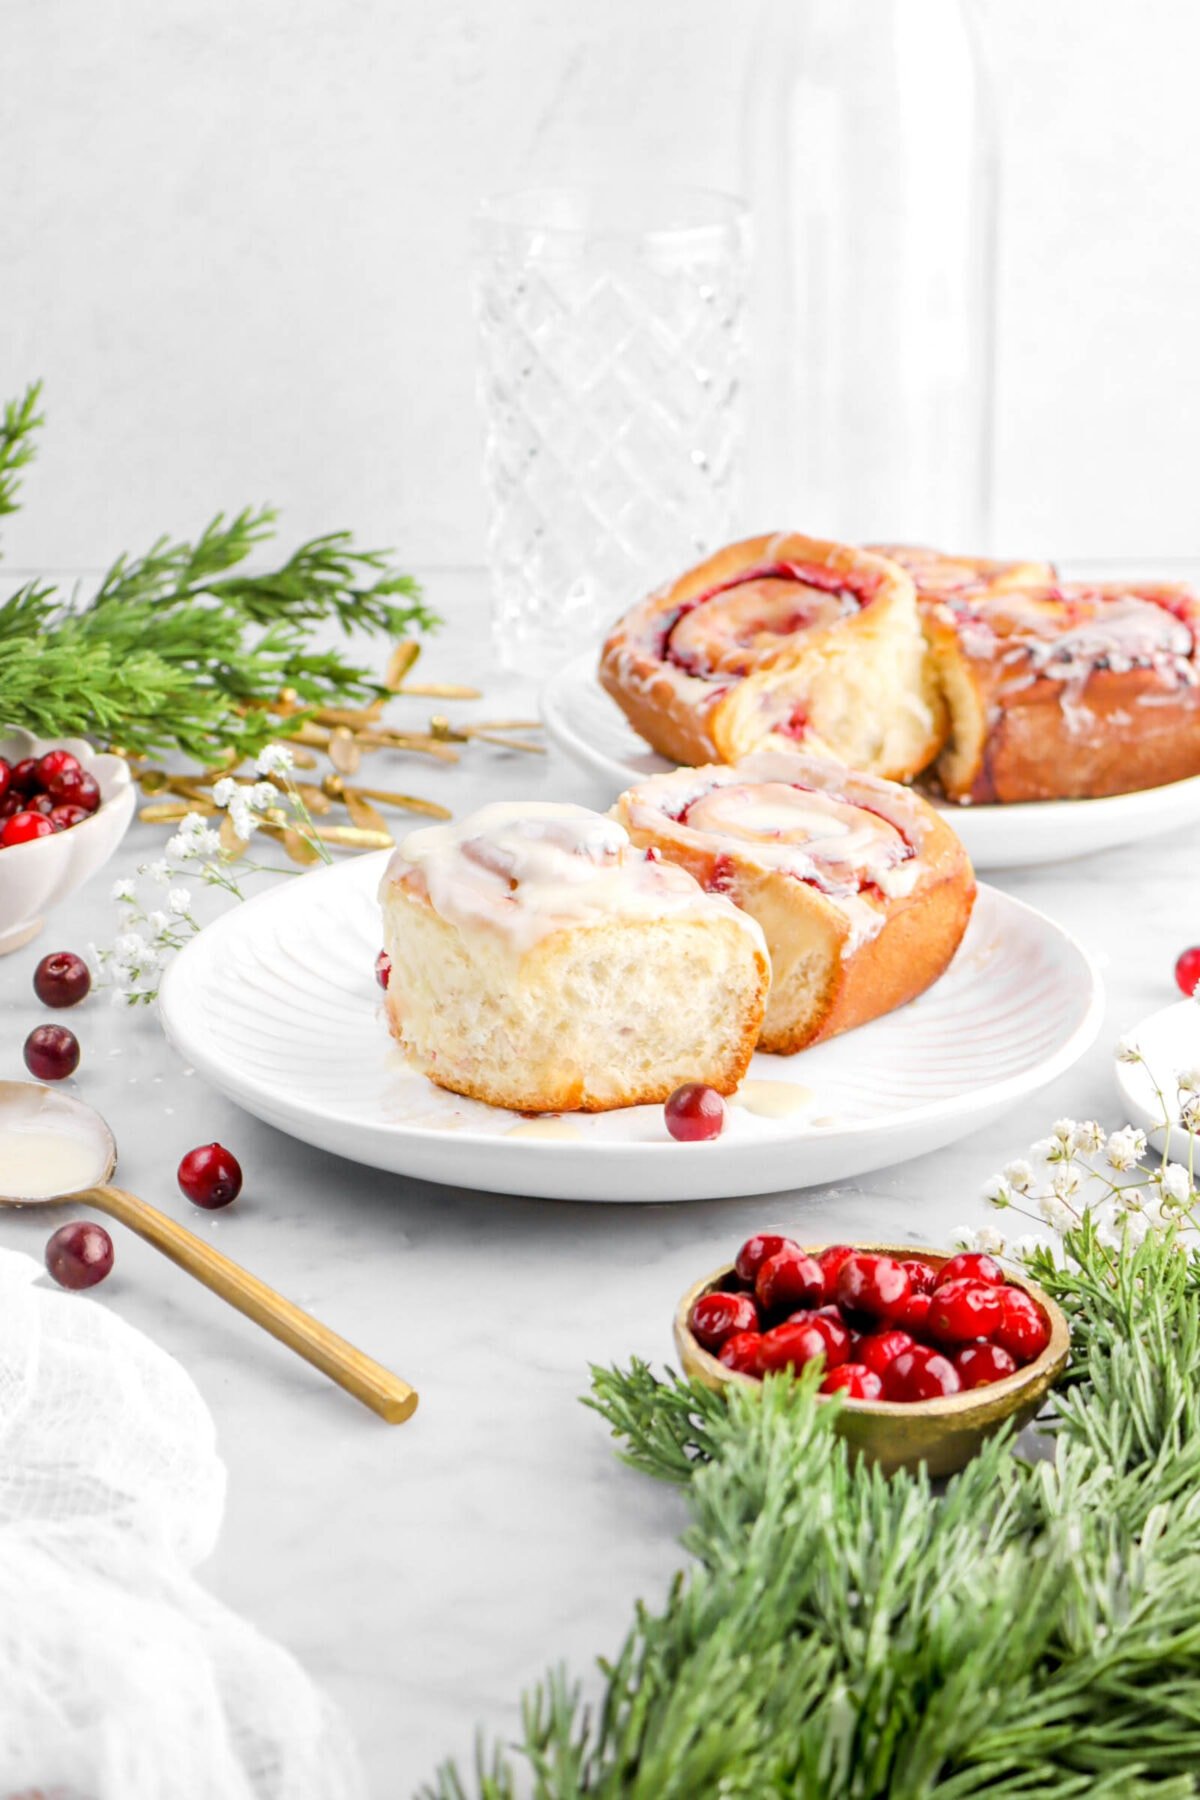 plate of two sweet rolls on white plate with greenery around and cranberries around on marble surface.